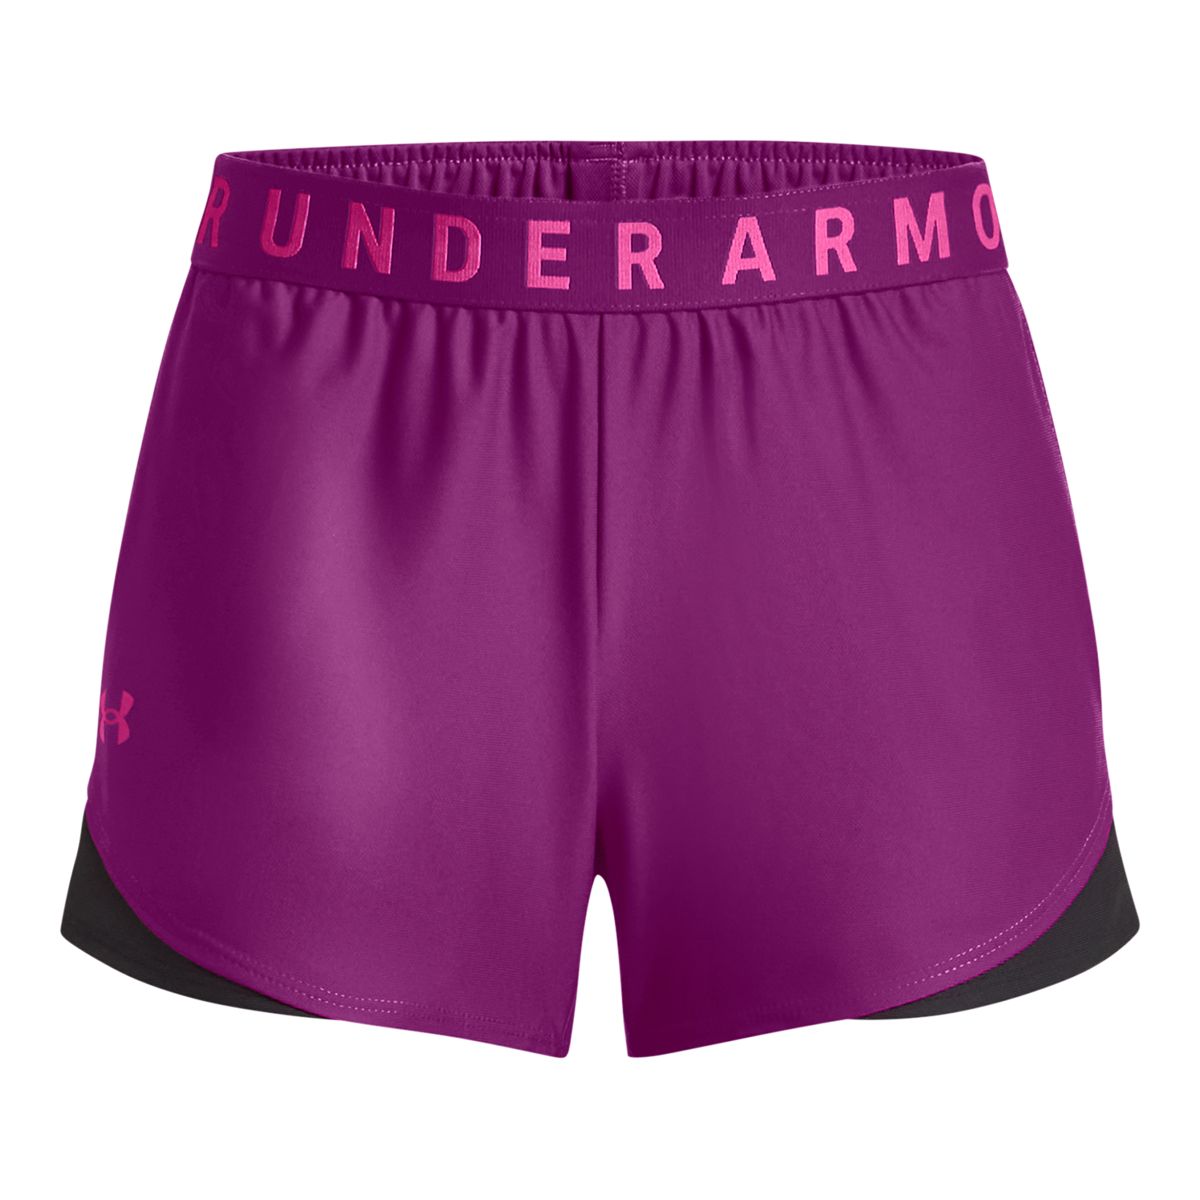  Under Armour Women's Play Up TriCo Shorts 3.0, Ash Plum  (554)/White, X-Small : Clothing, Shoes & Jewelry